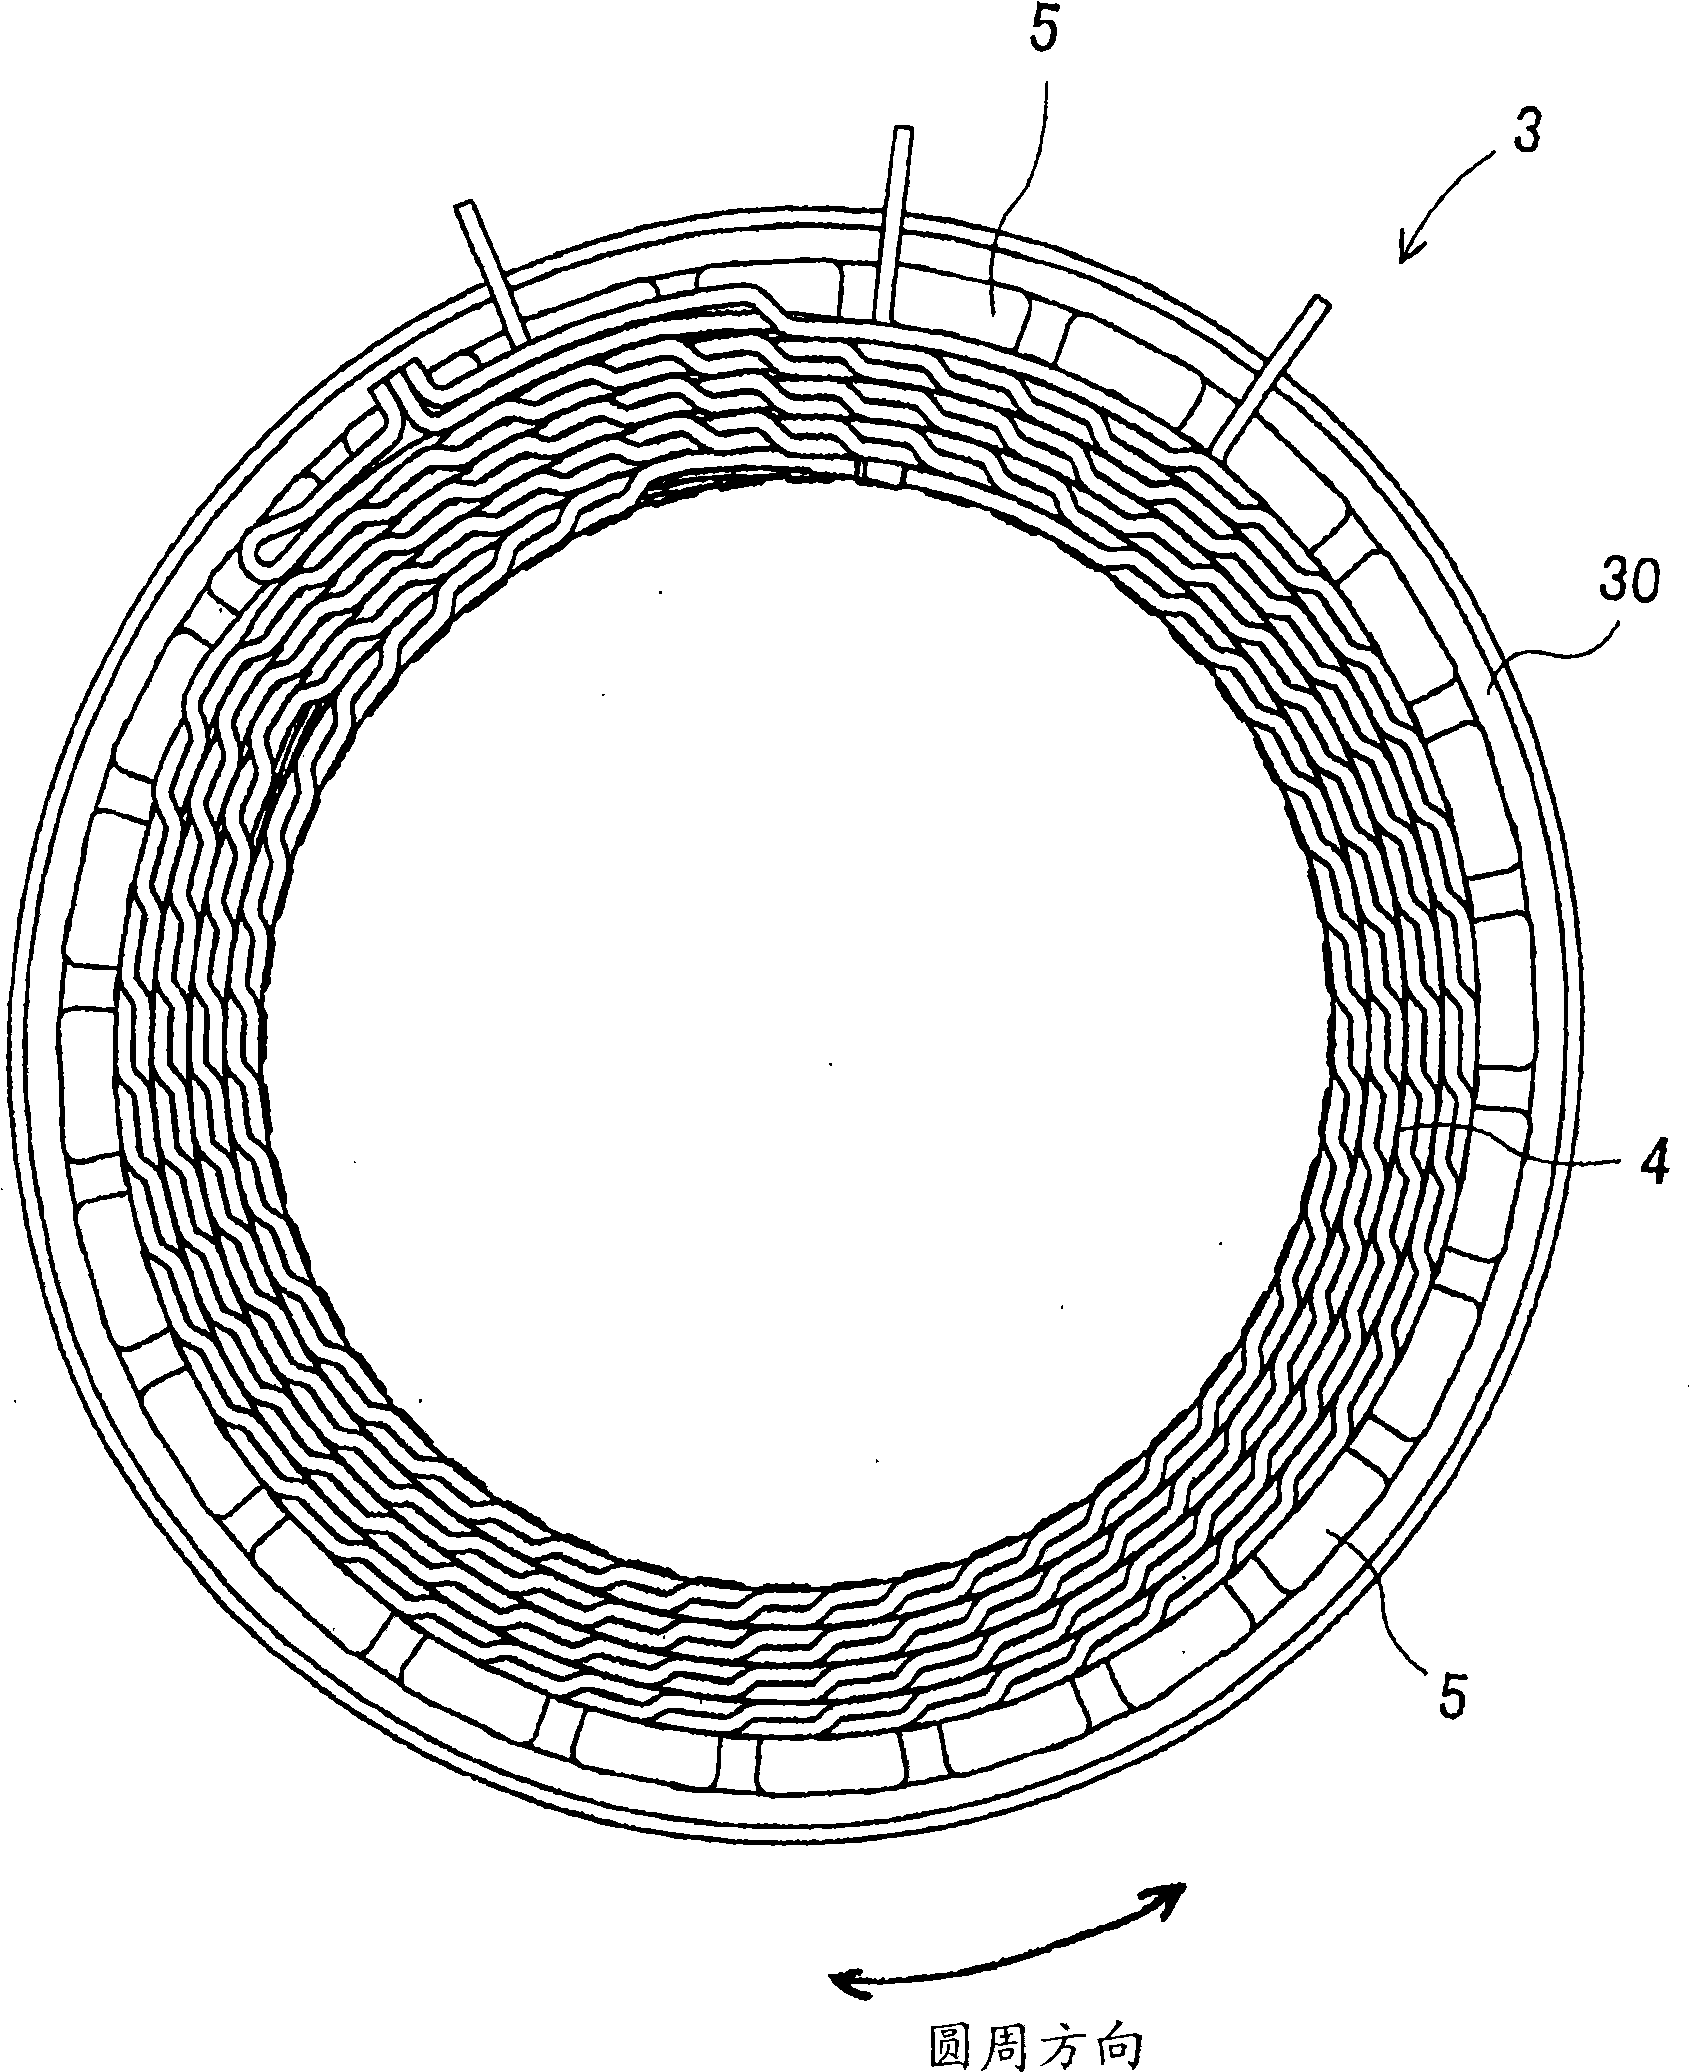 Stator for rotary electric machine, and rotary electric machine using the stator